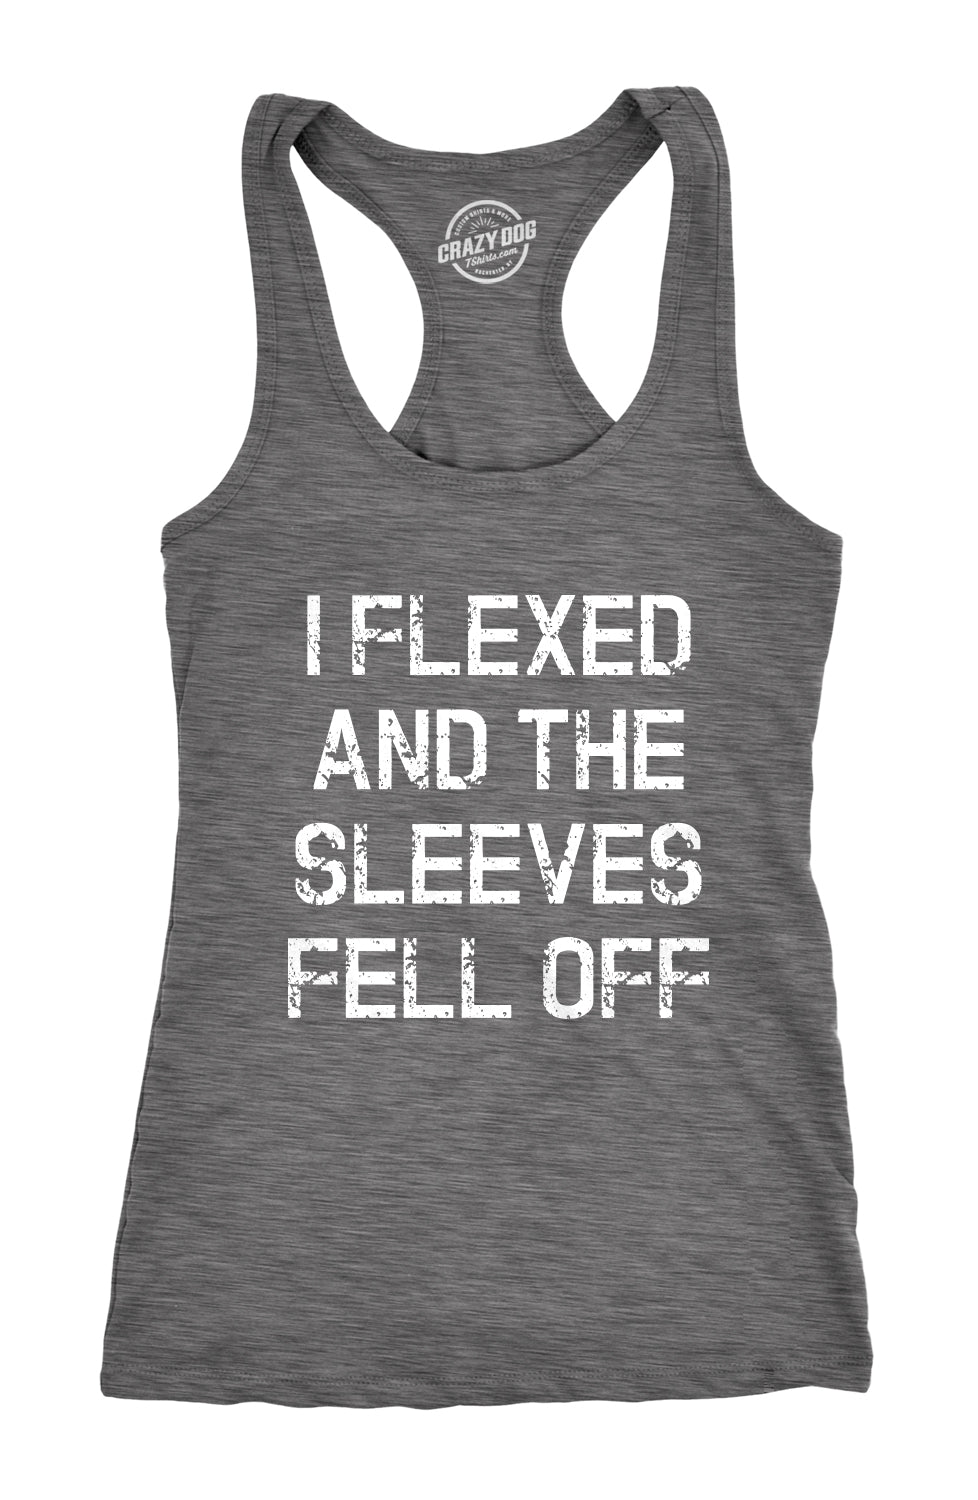 Funny Dark Heather Grey I Flexed And The Sleeves Fell Off Womens Tank Top Nerdy Fitness Tee